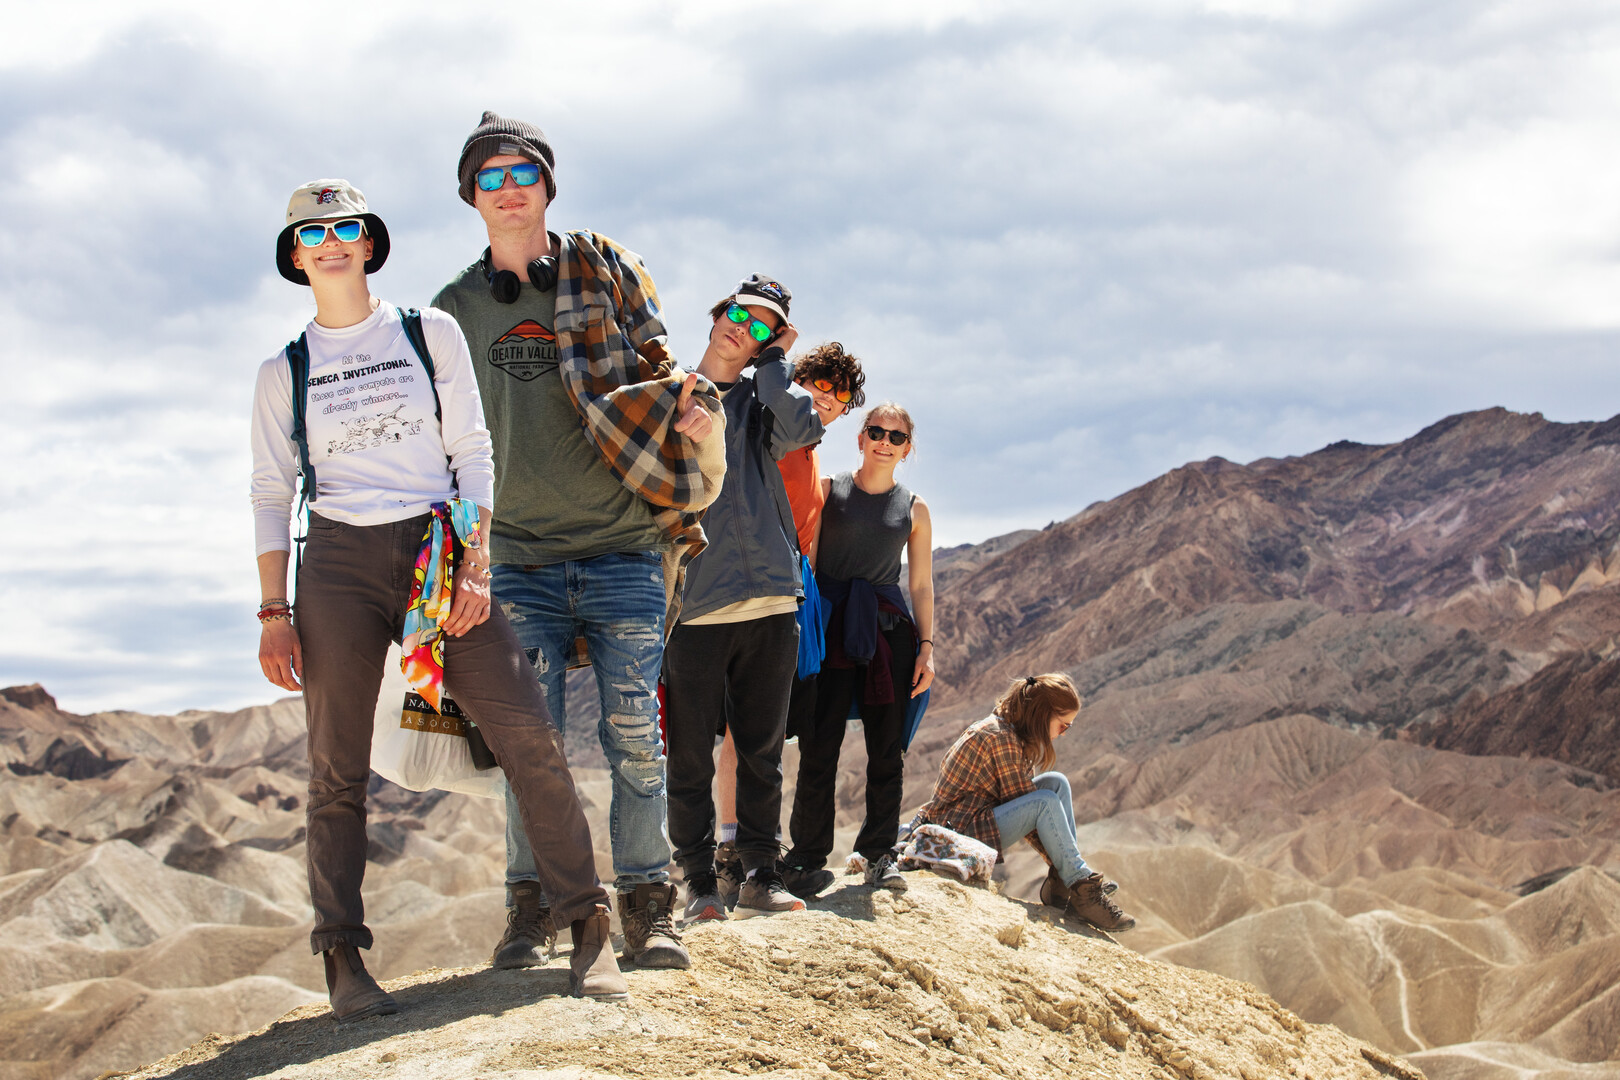 Audra Burral '23, Hunter Markowich '26, Wade Noelke '24, Jesus Lara Rivas '25, Ahnalysse Wyland-Olberding '25, and Mia Degner '24, standing on a cliff in Death Valley, California, during their spring break road trip with Outdoor Ed on March 29, 2023. Photo by Mila Naumovska '26.